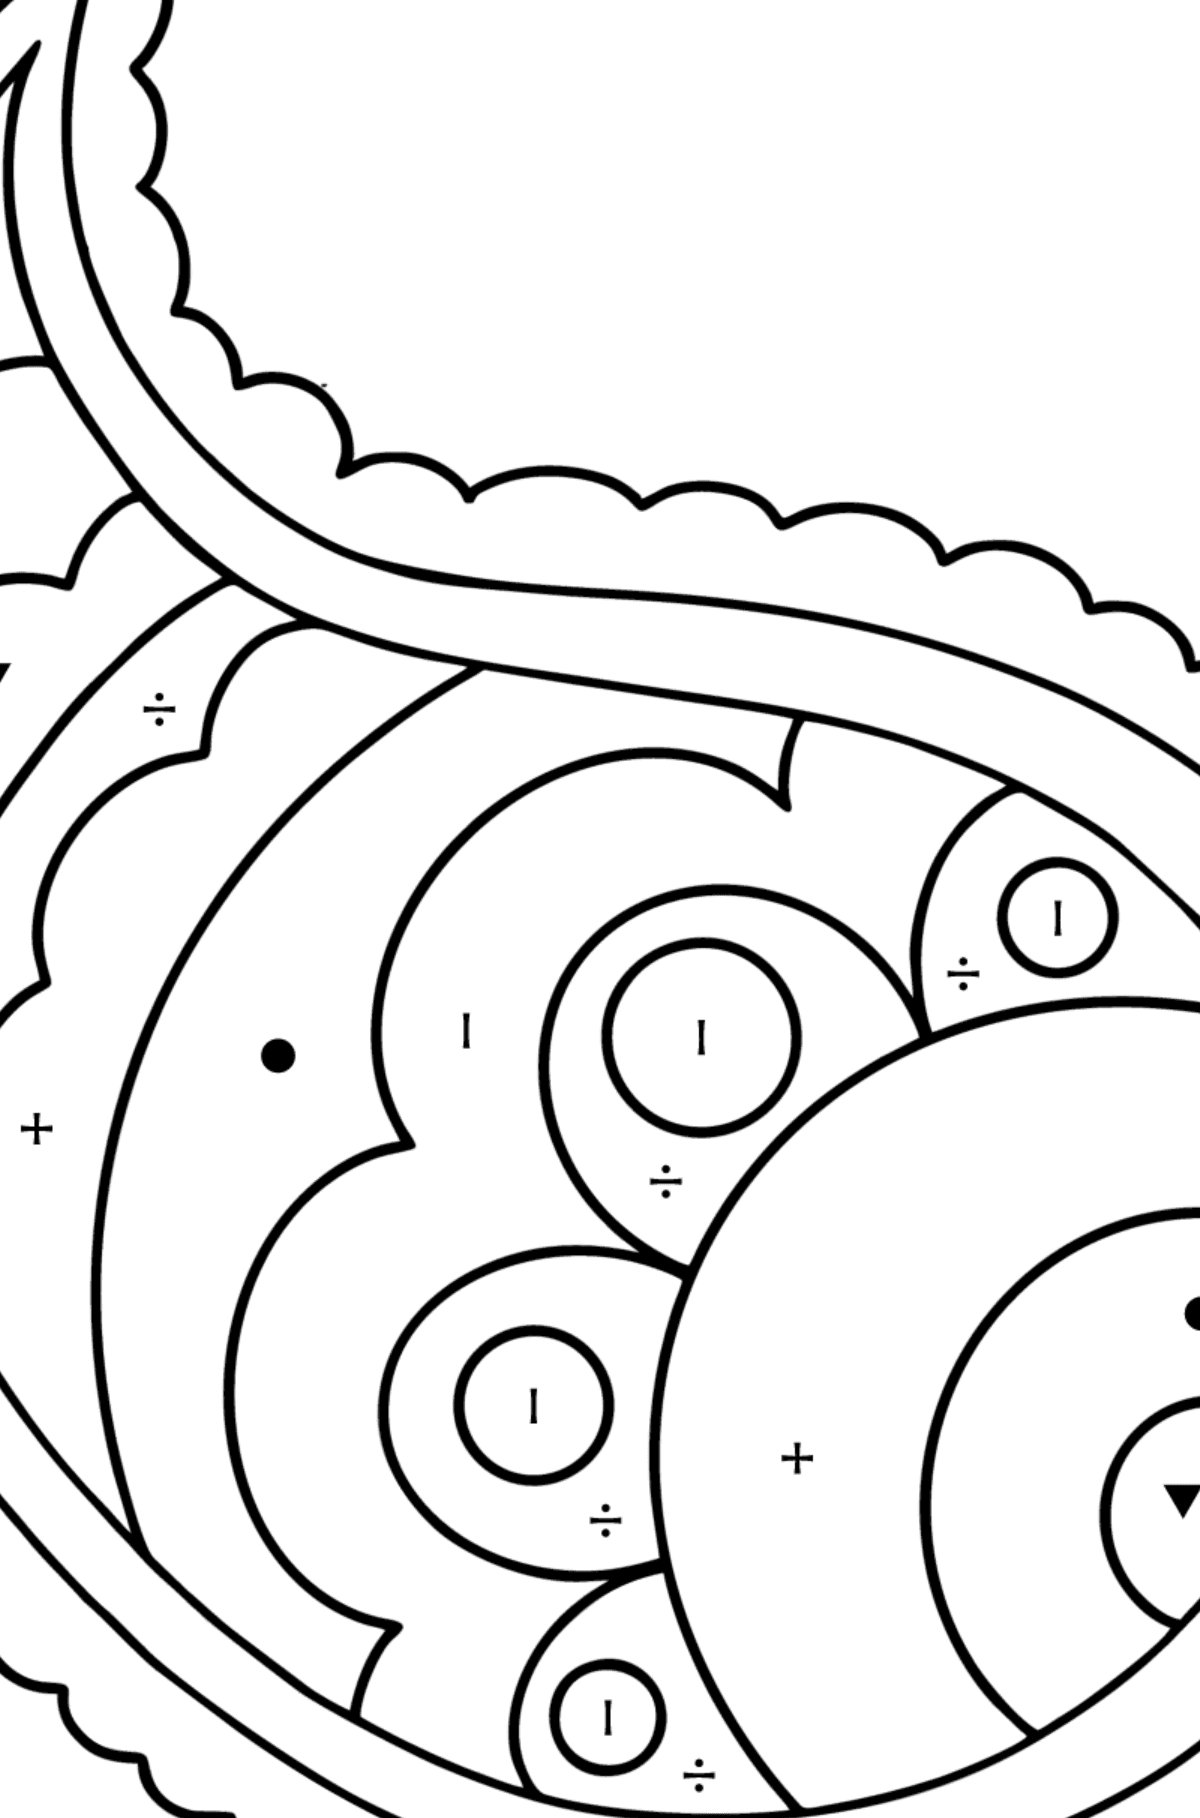 Paisley coloring page - 17 Elements - Coloring by Symbols for Kids